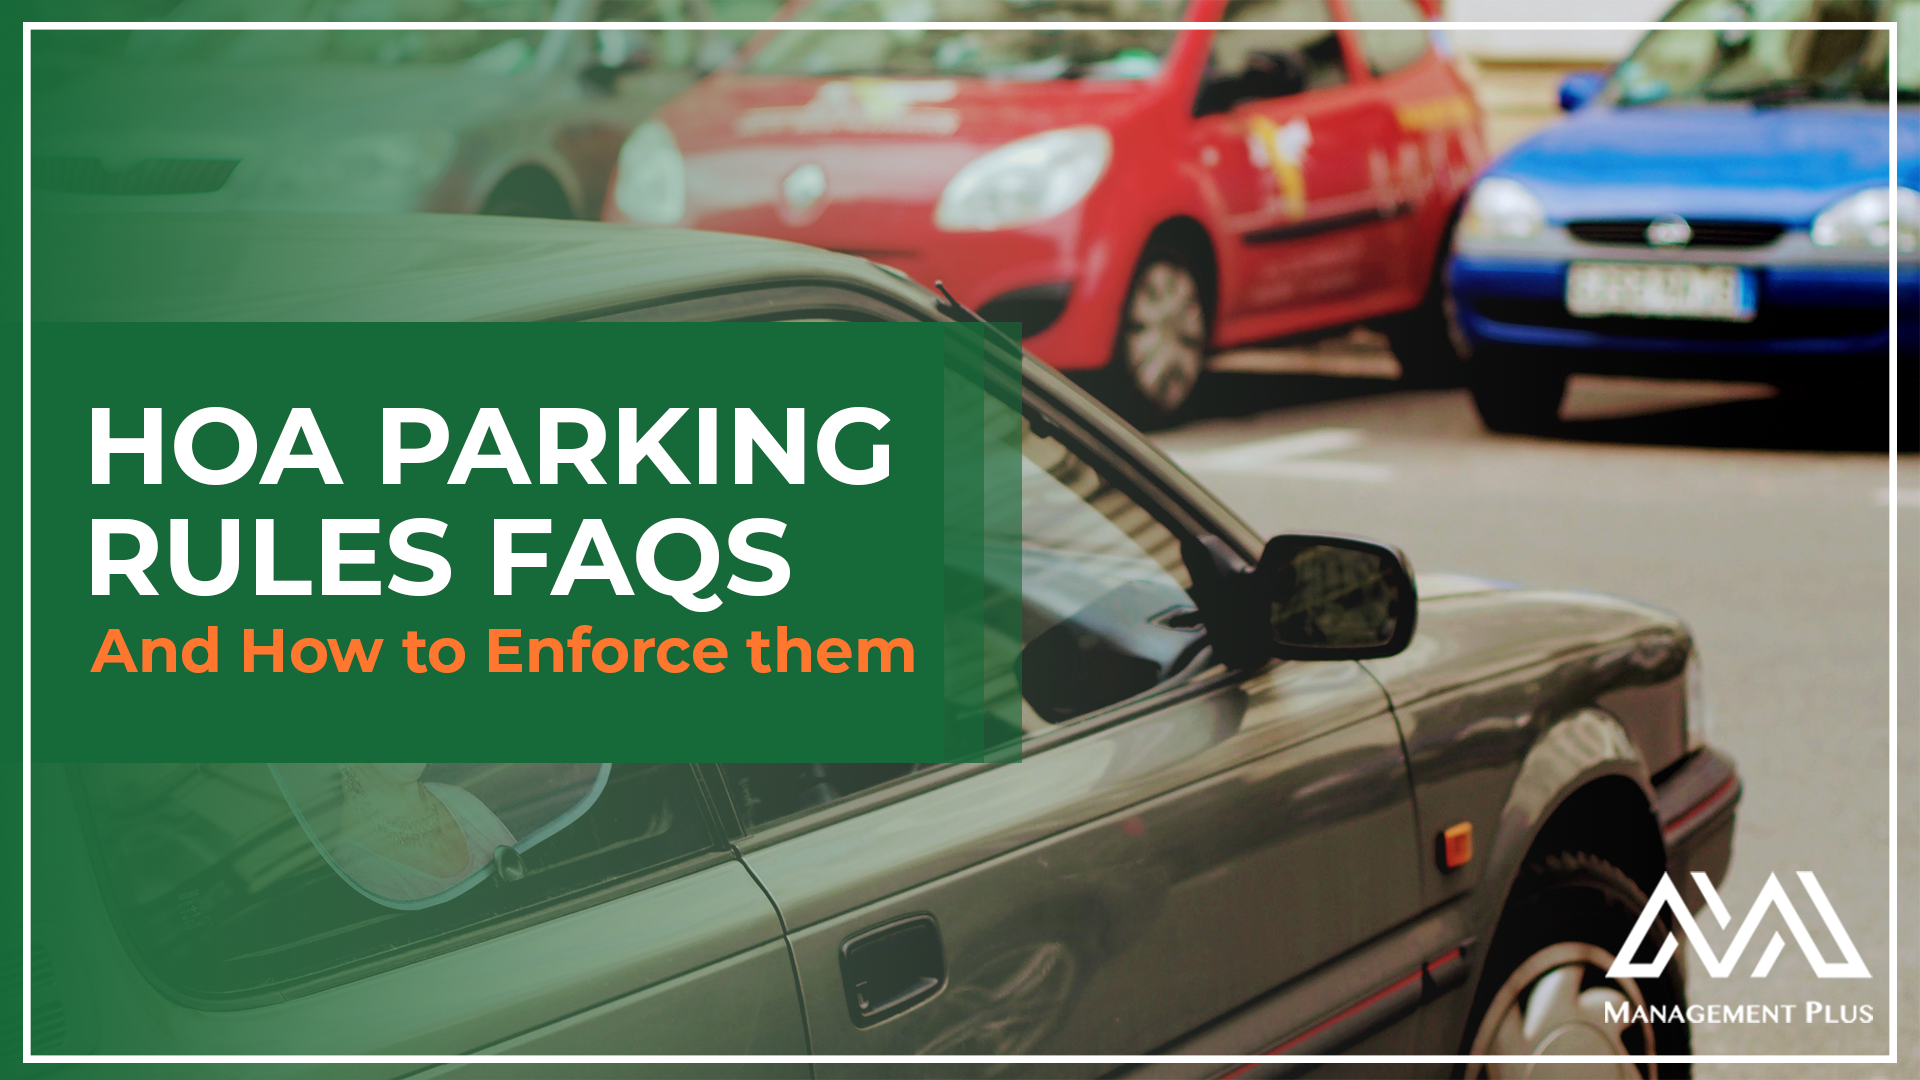 Cars in a parking lot with the text "HOA Parking Rules FAQs and How to Enforce Them"